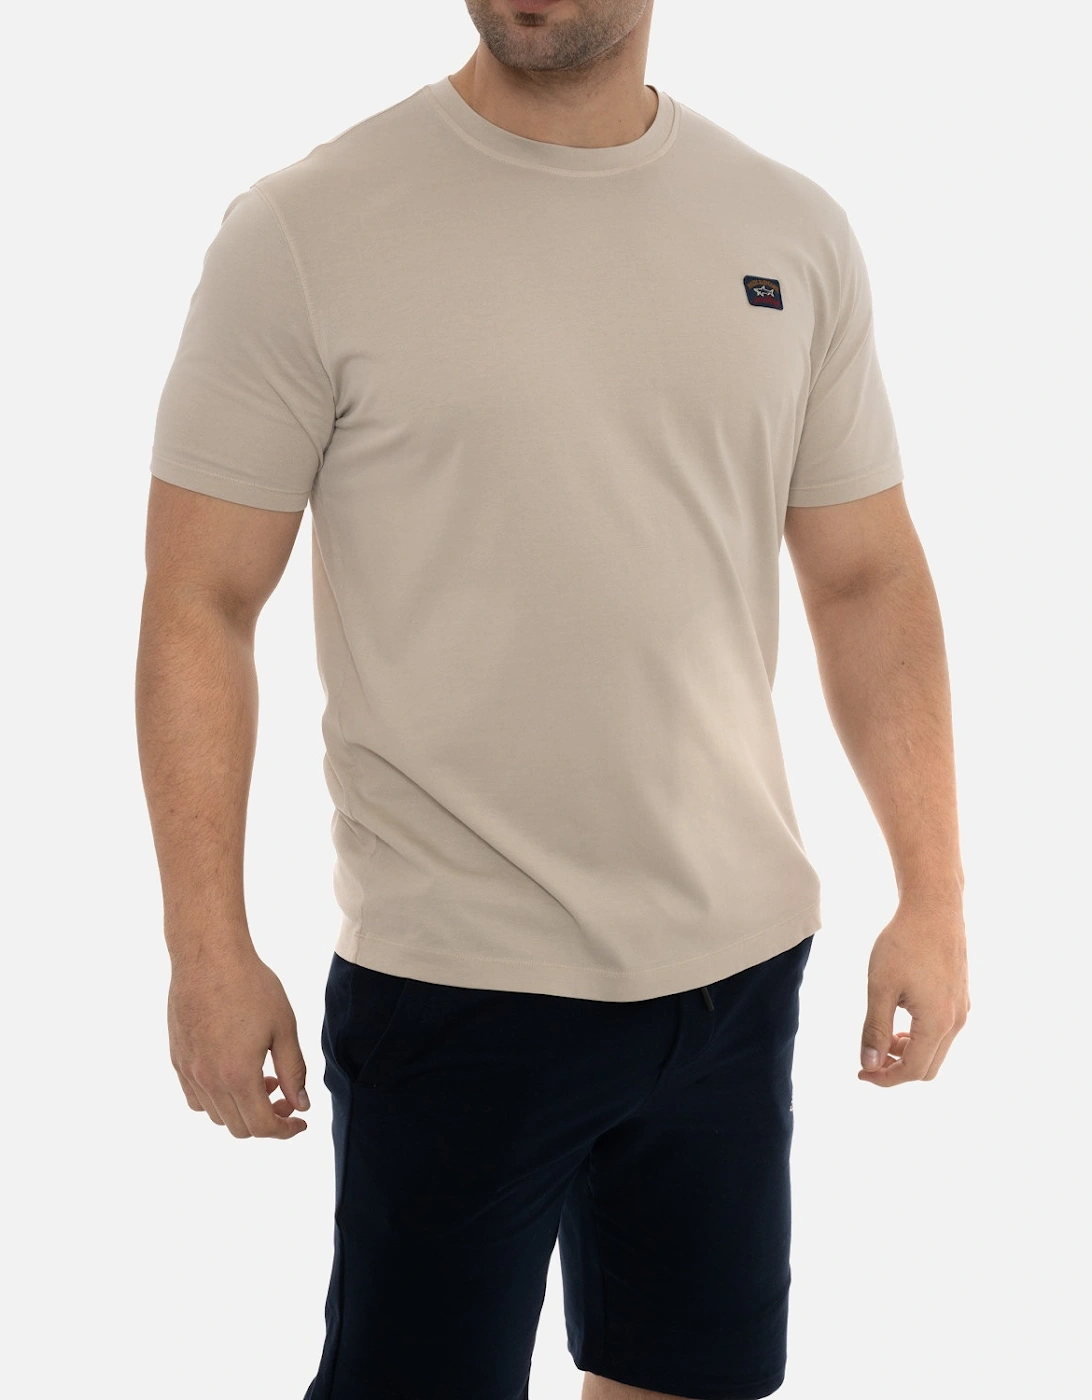 Embroidered Badge T-Shirt (Beige)